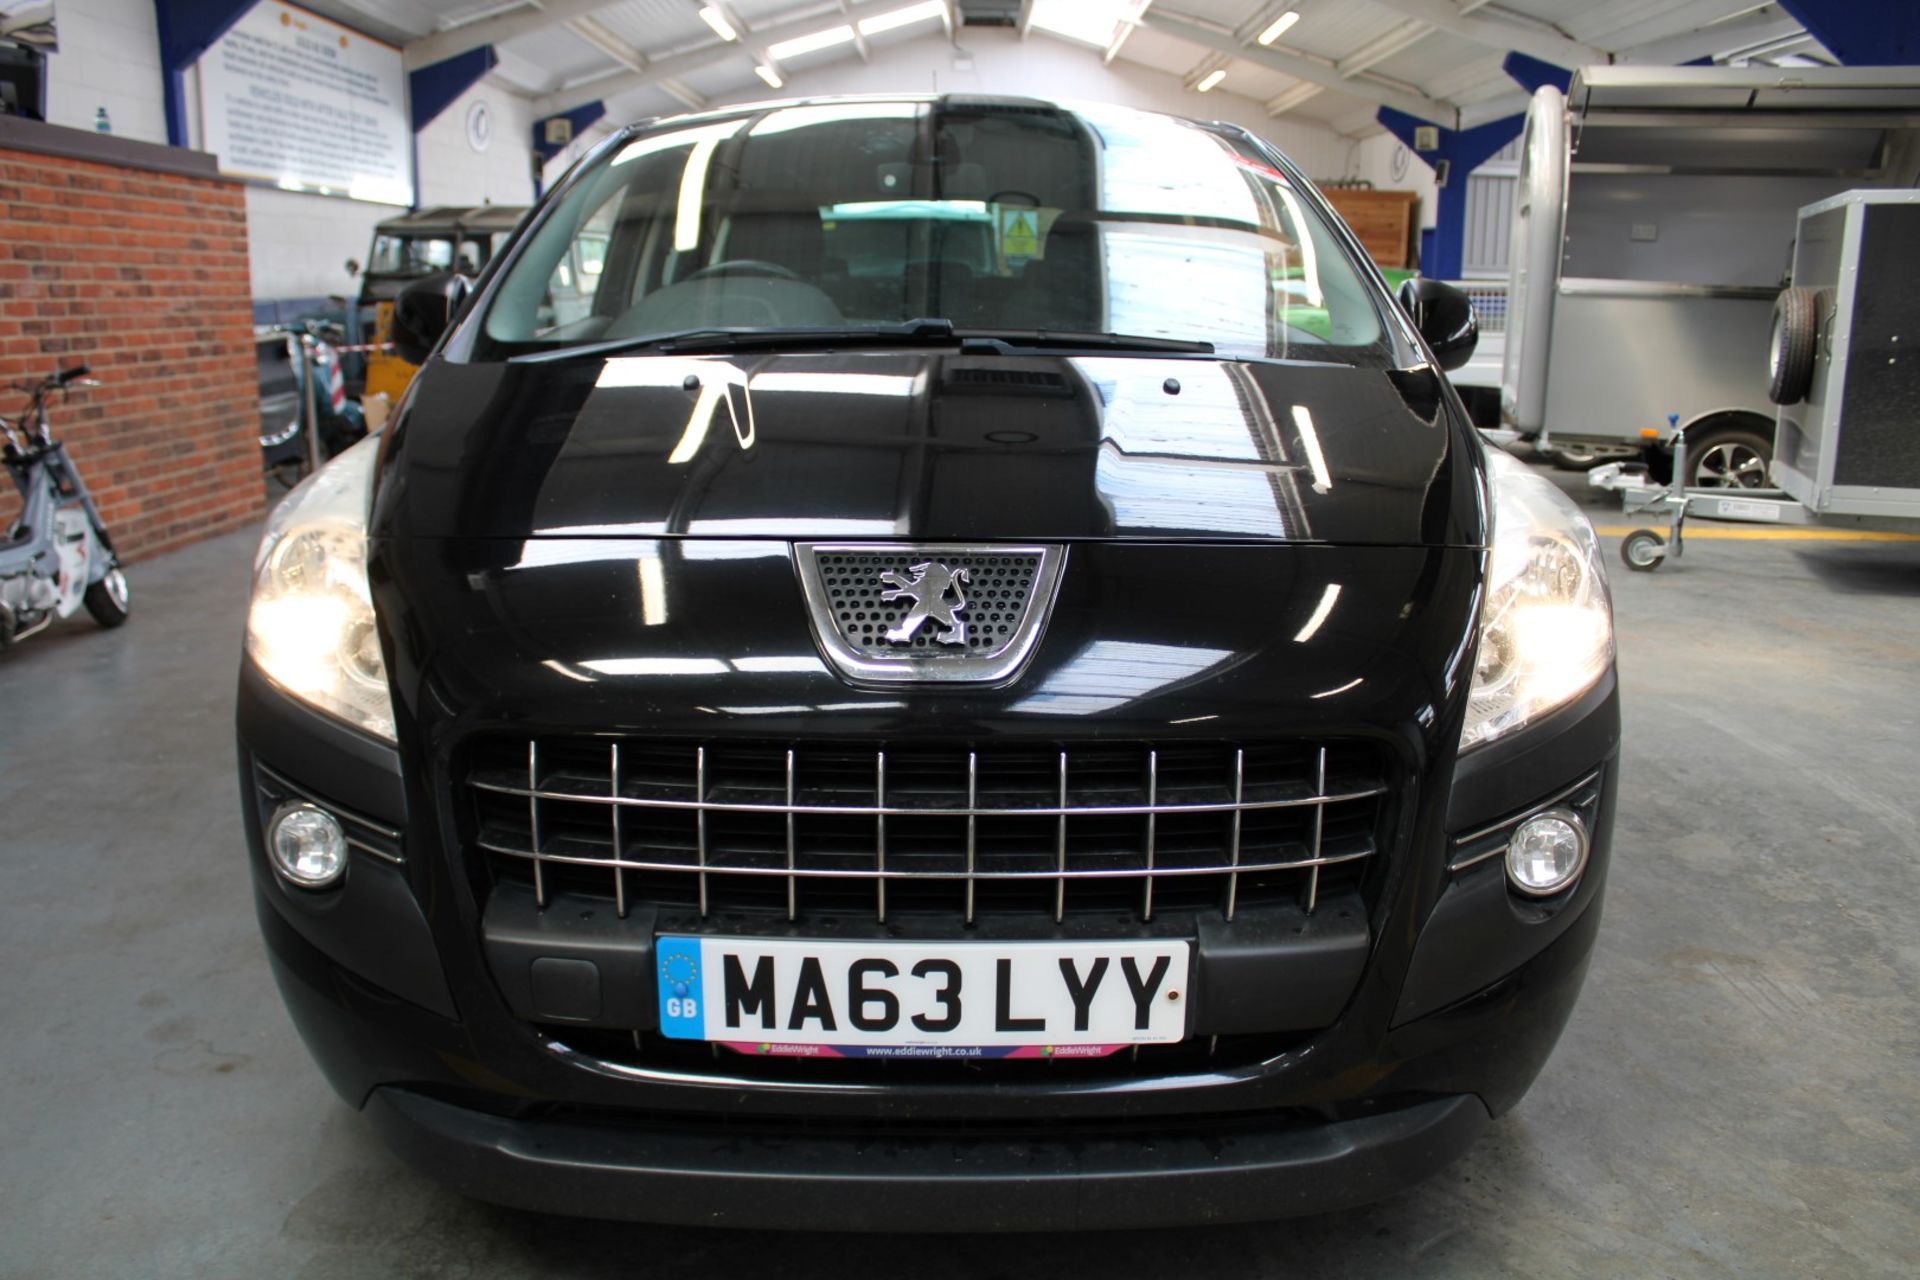 63 13 Peugeot 3008 Active HDI - Image 2 of 30